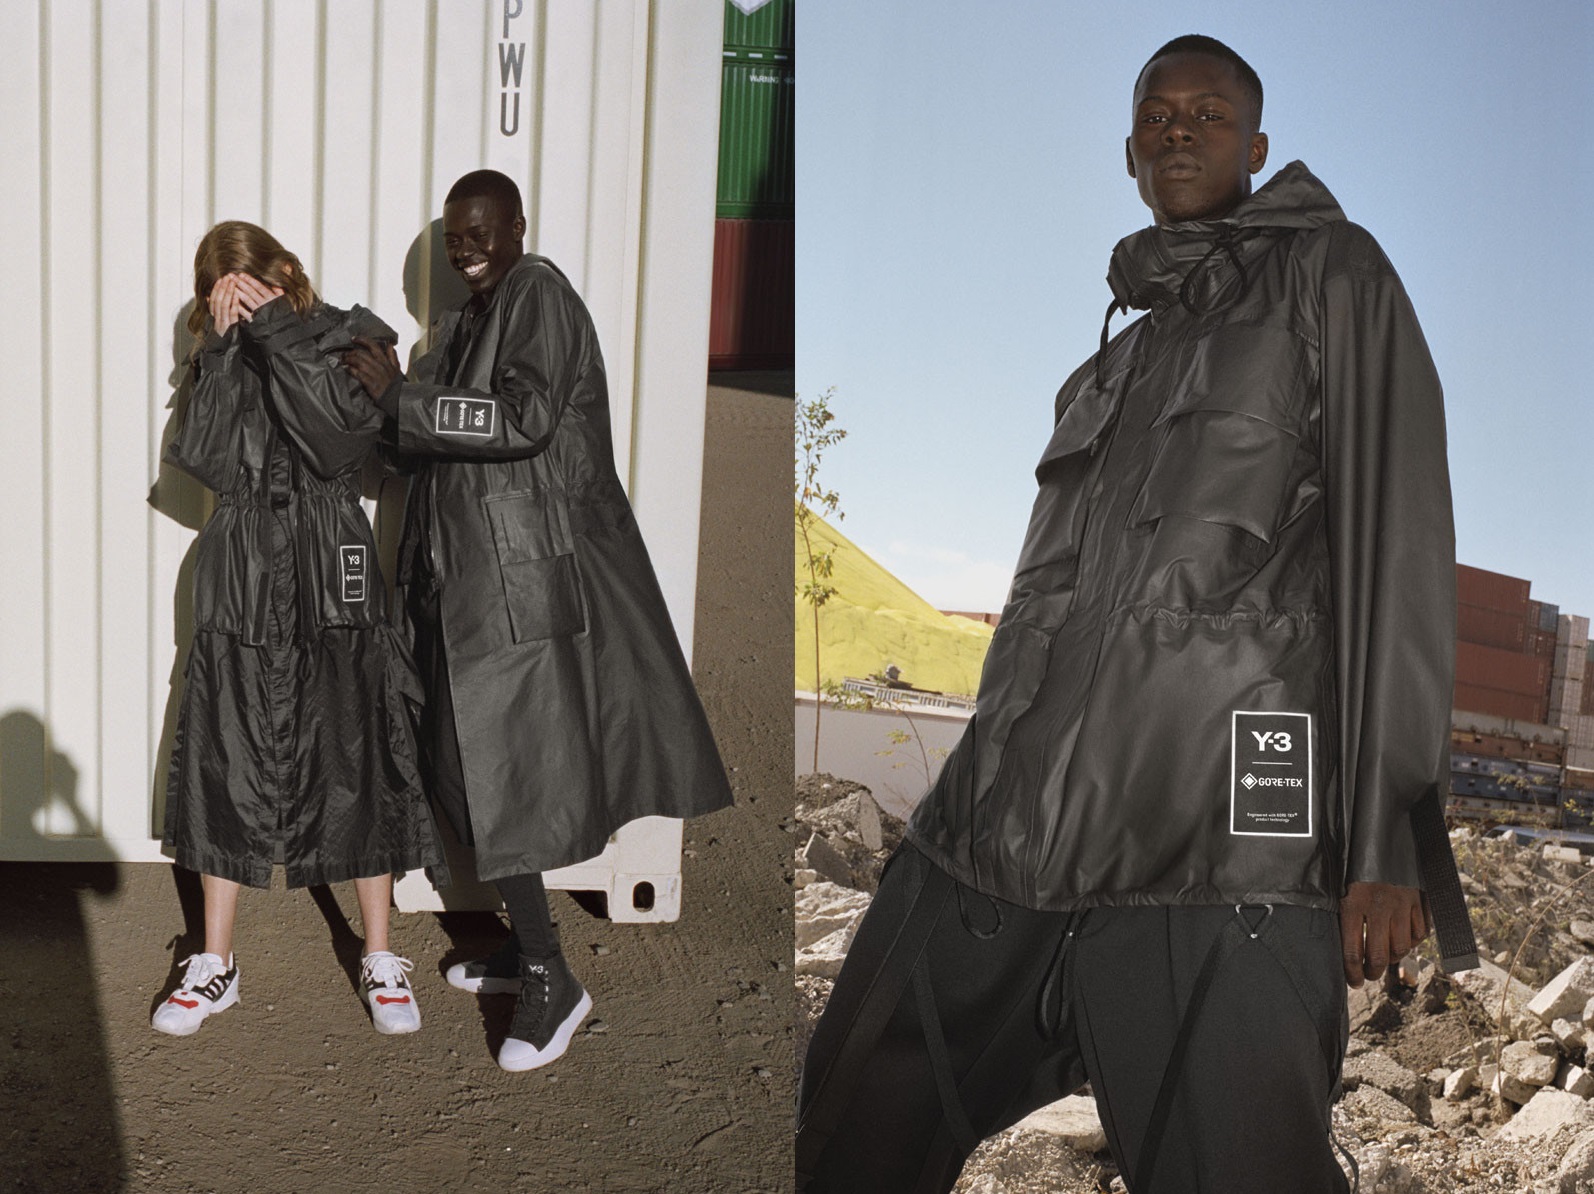 Y-3 Utilises the World’s Lightest GORE-TEX in New SS19 Collection